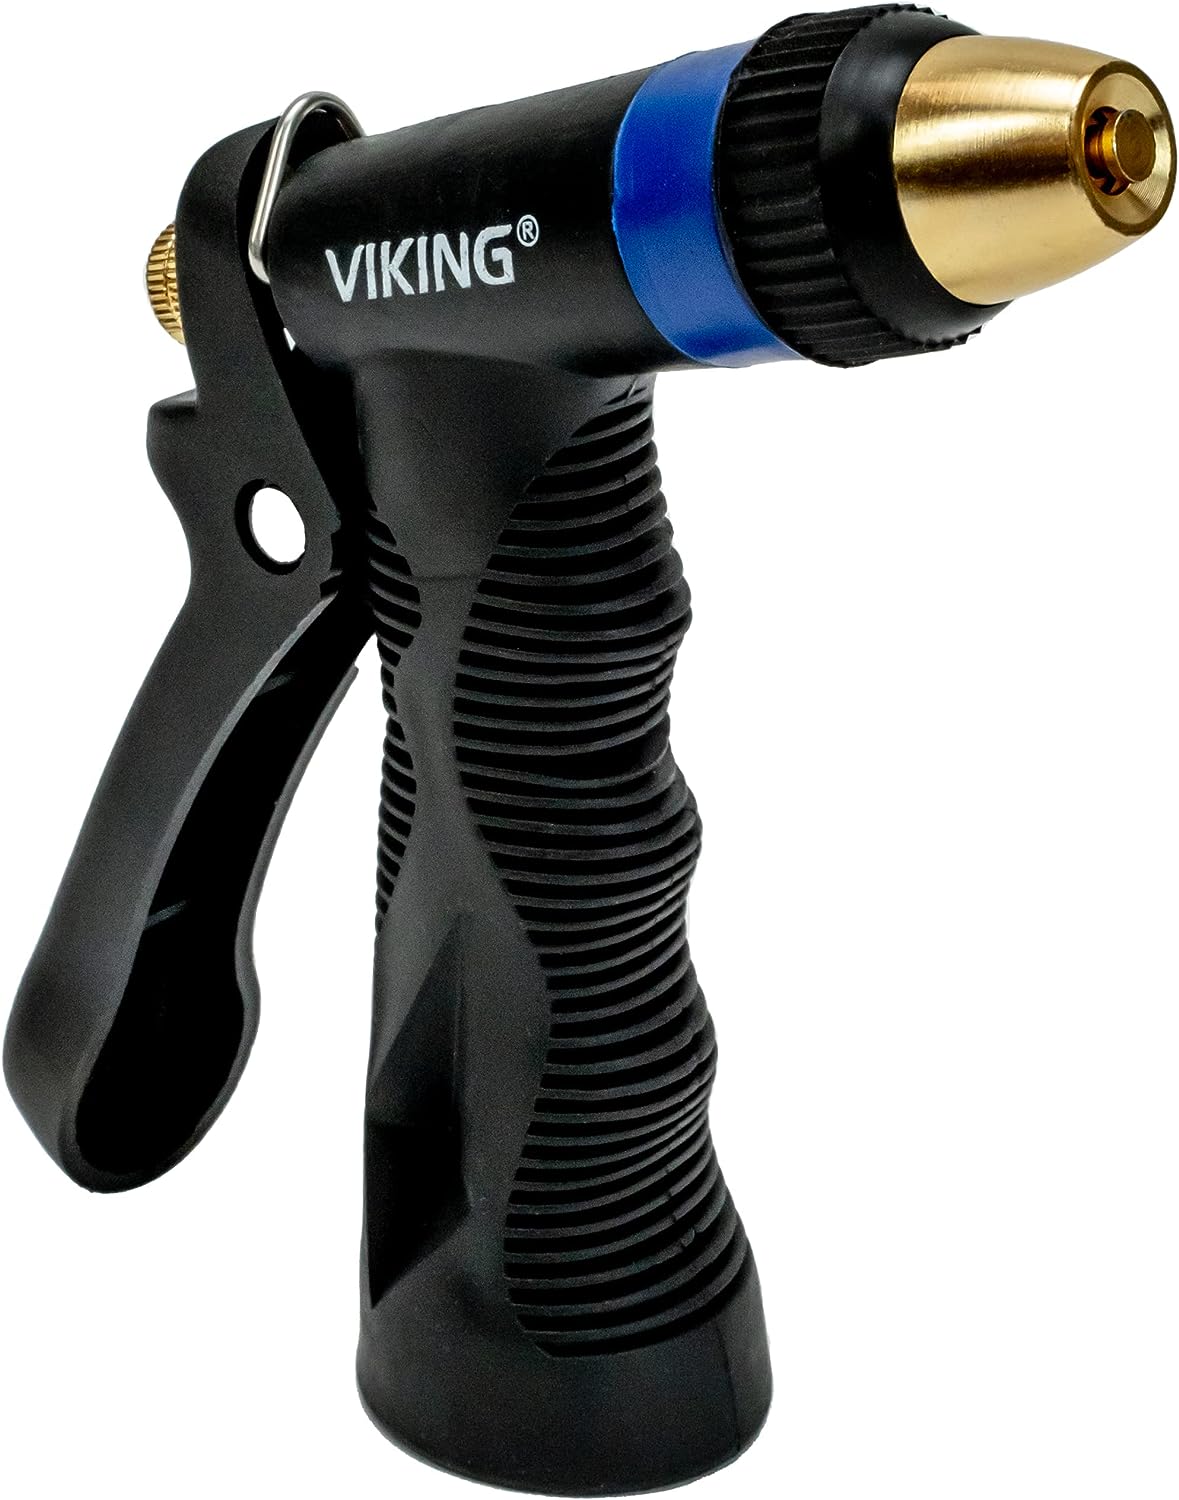 VIKING High Pressure Adjustable Hose Nozzle with Brass [...]